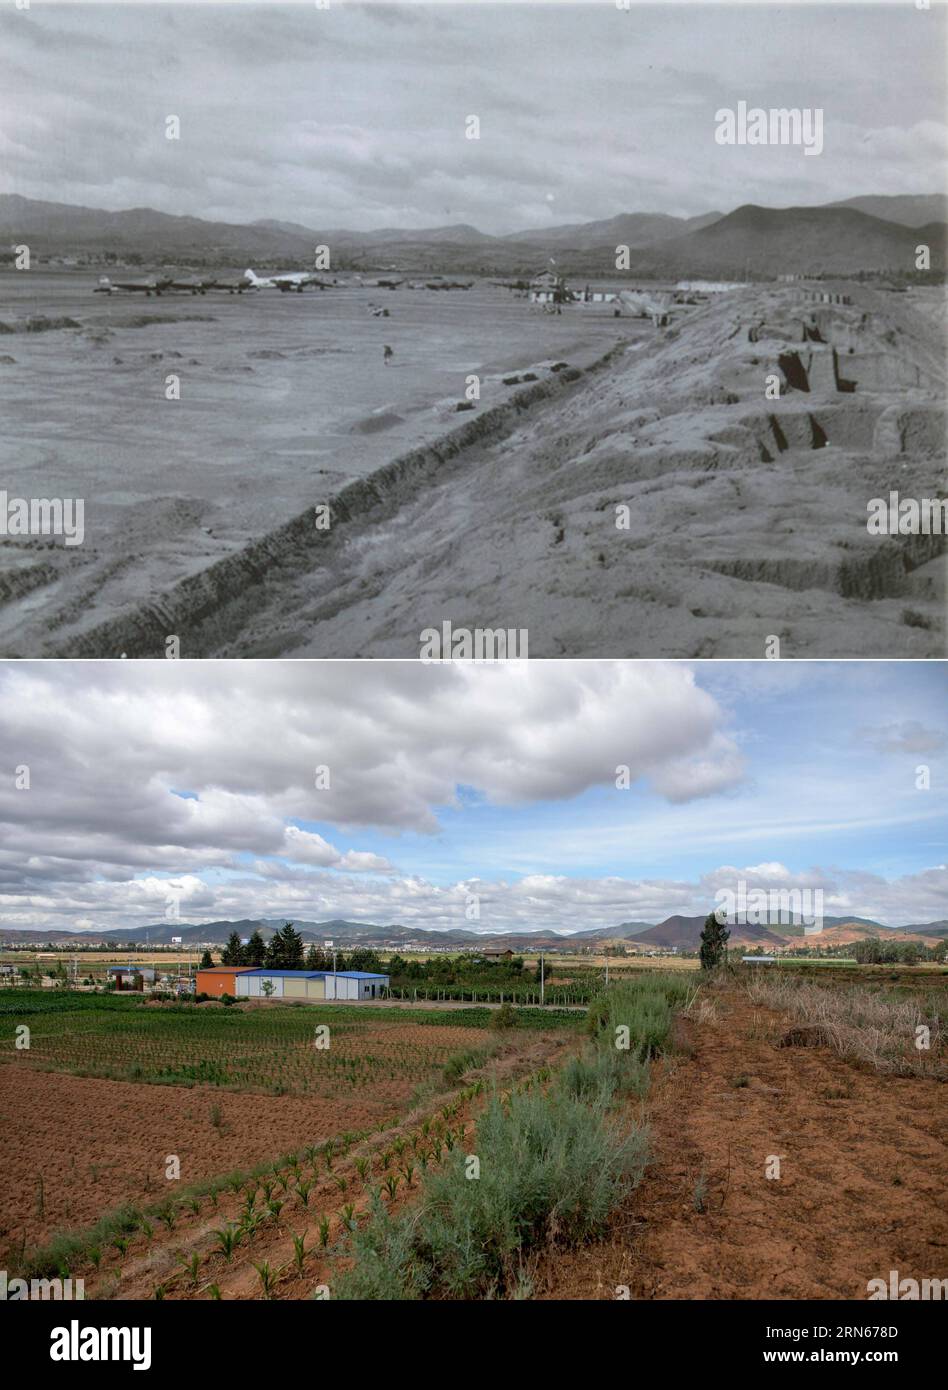 (150714) -- BEIJING , July 14, 2015 -- Combination photo shows the file photo (upper) of the Yunnanyi Airport during the anti-Japanese war period (1937-1945) in southwest China s Yunnan Province and photo (lower) of the same place taken on June 29, 2015. After Japanese forces occupied the western part of the Nujiang River in 1942, Yunnanyi became increasingly important as a strategic military airport for the Allies on the frontline, as it was the intersection of the Ancient Tea Road, the Burma Road and the Hump Course. Seventy years after the Chinese People s War of Resistance against Japanese Stock Photo